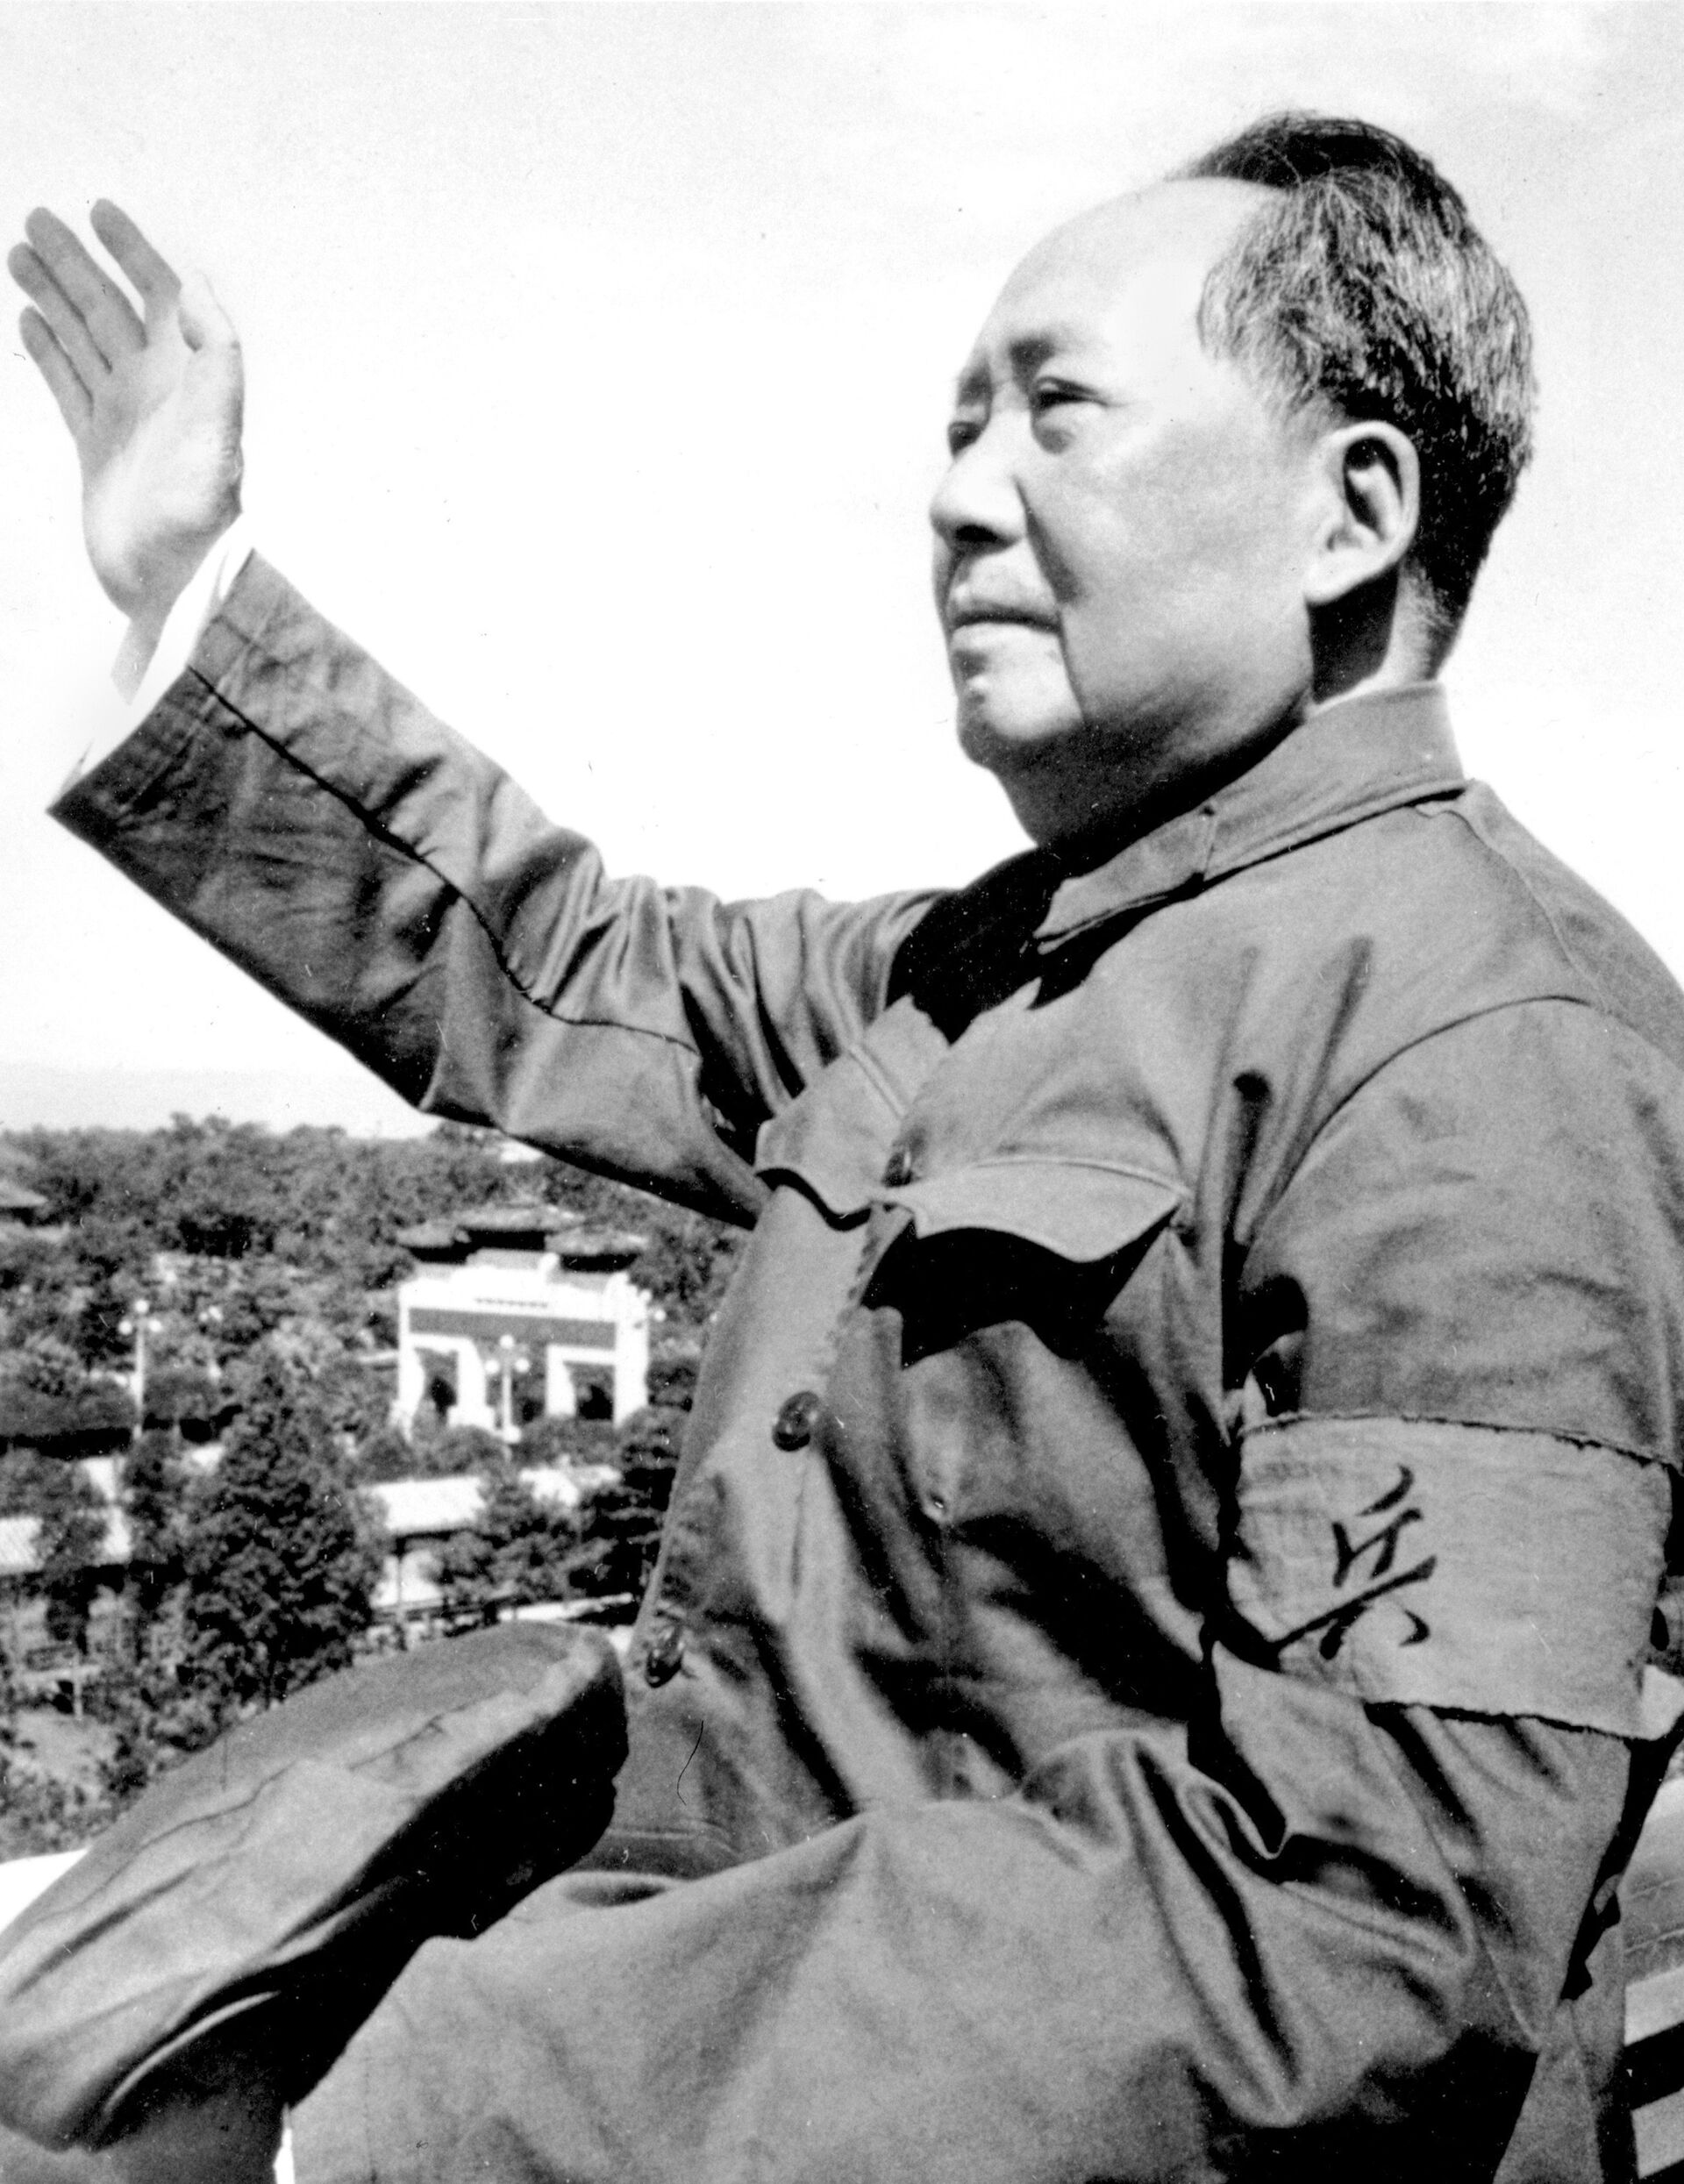 FILE - In this file photo taken in 1966, Mao Zedong waves at the beginning of China's Cultural Revolution. On May 16, 1966, the Communist Party's Politburo produced a document announcing the start of what was formally known as the Great Proletarian Cultural Revolution to pursue class warfare and enlist the population in mass political movements. - Sputnik International, 1920, 29.07.2022